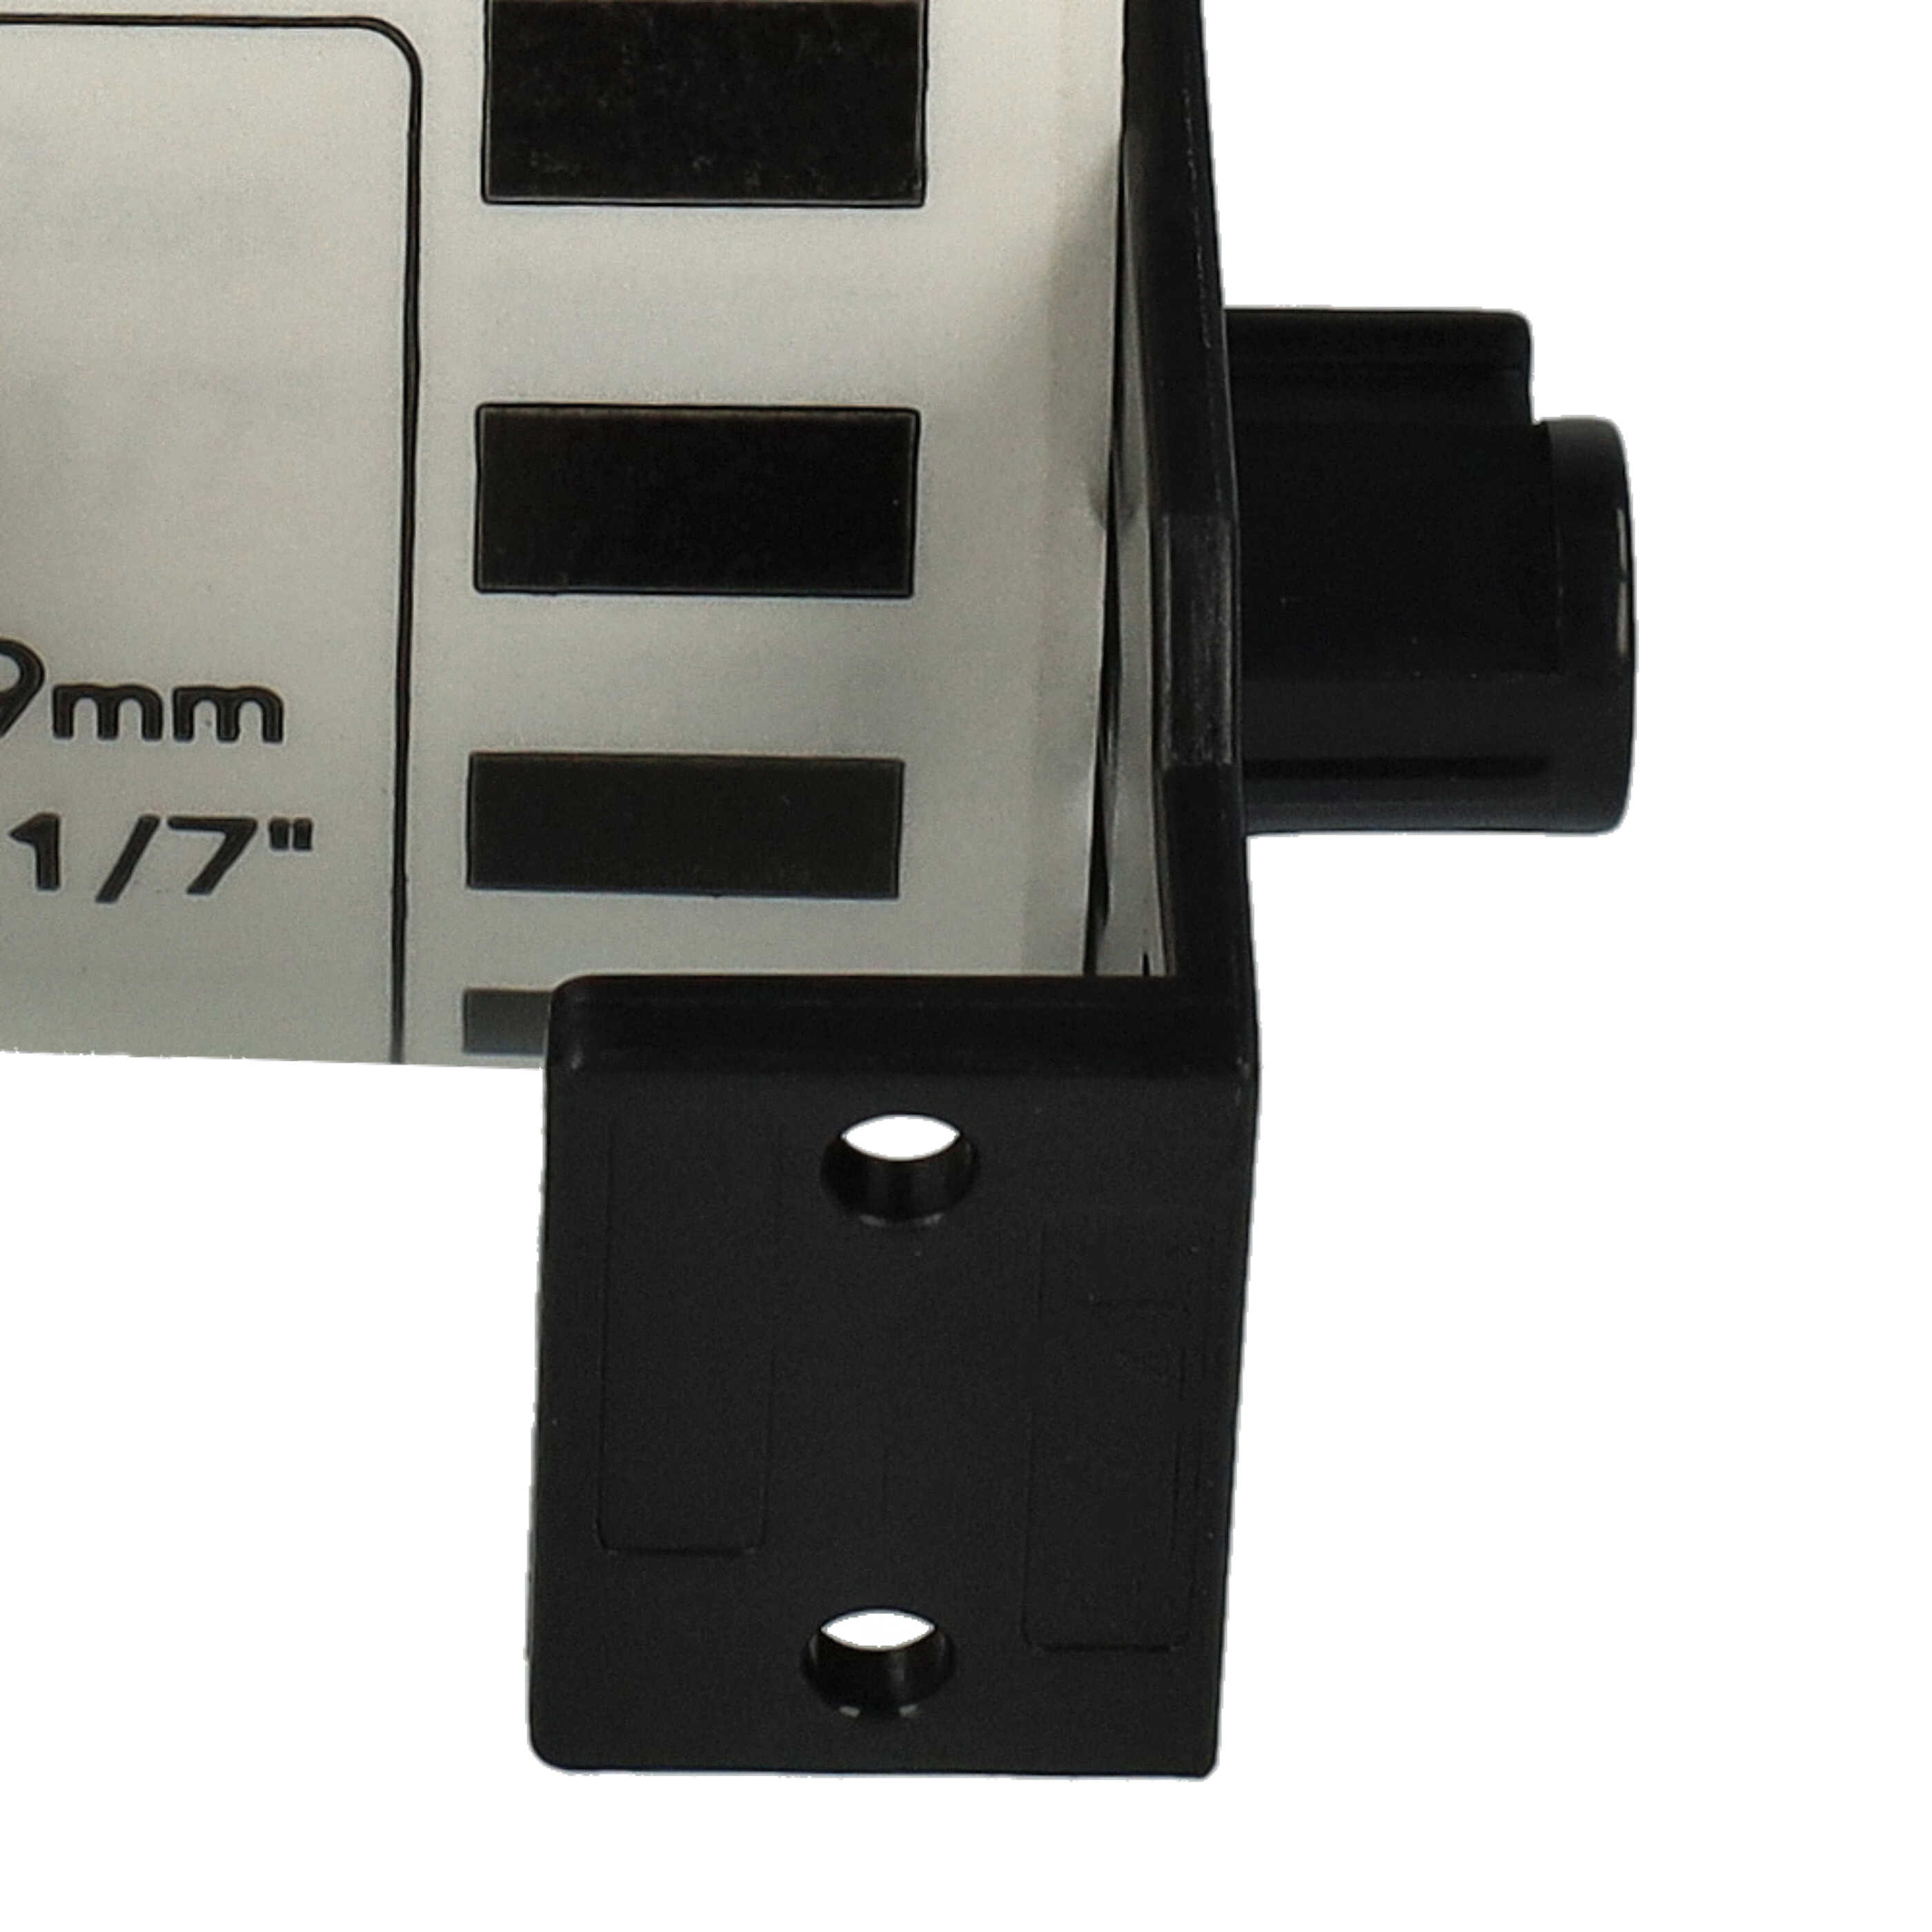 2x Labels replaces Brother DK-22211 for Labeller - 29 mm x 15.24m + Holder